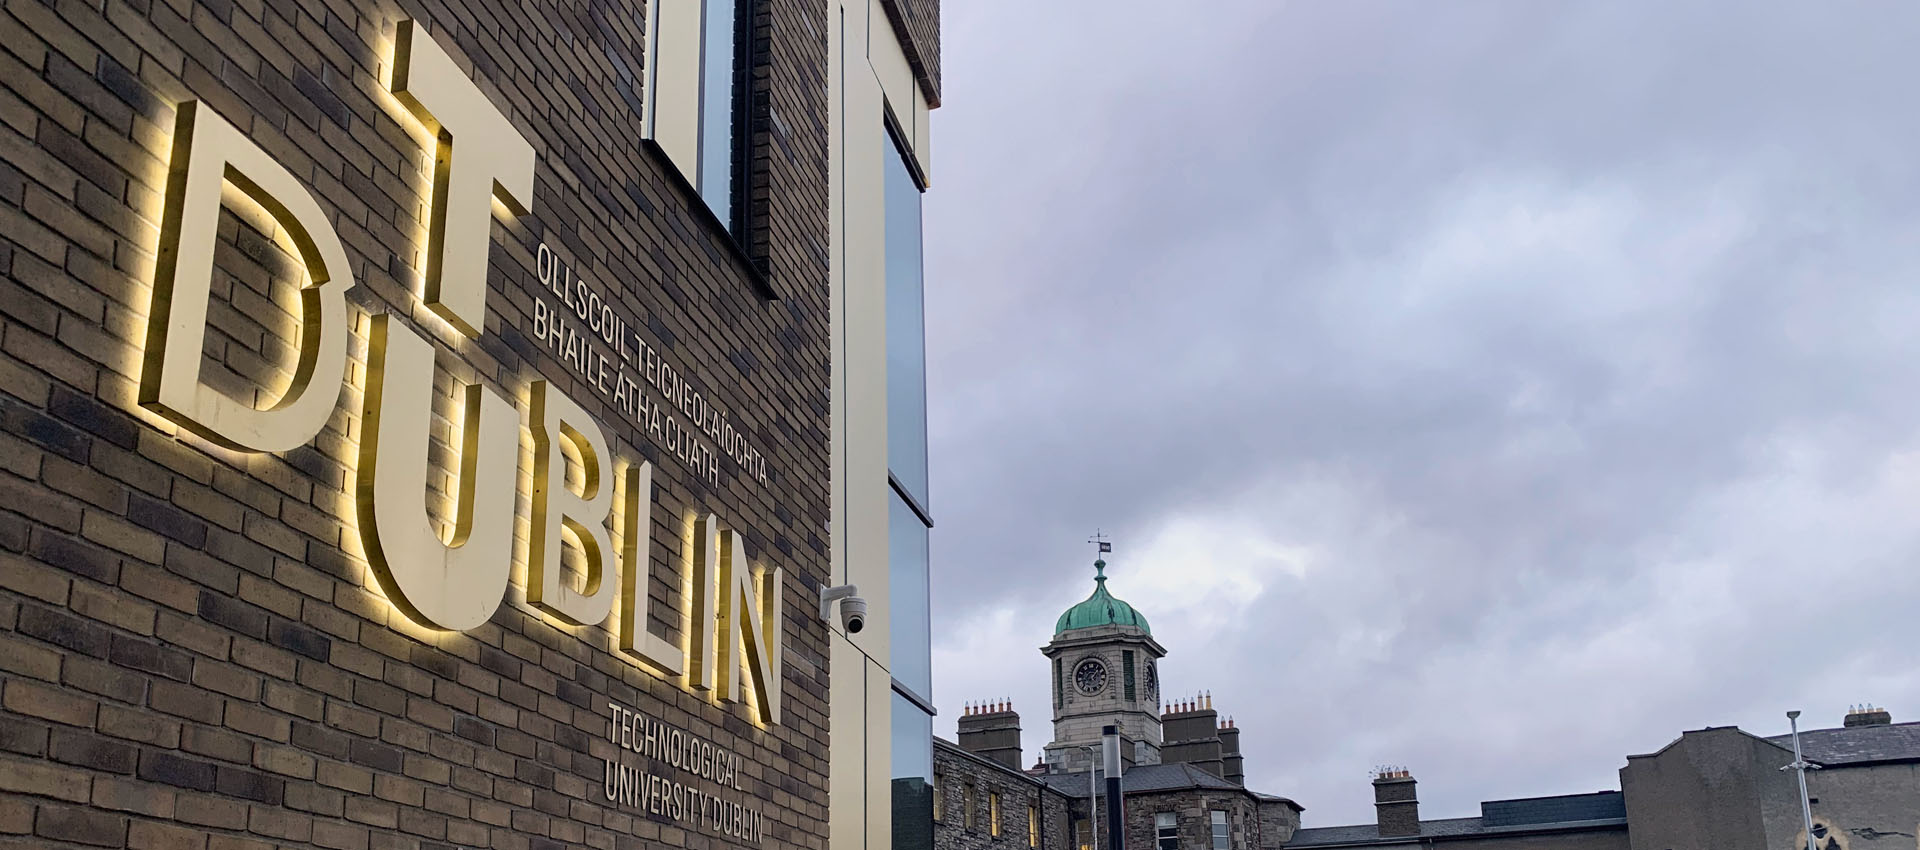 Learn more about TU Dublin's courses